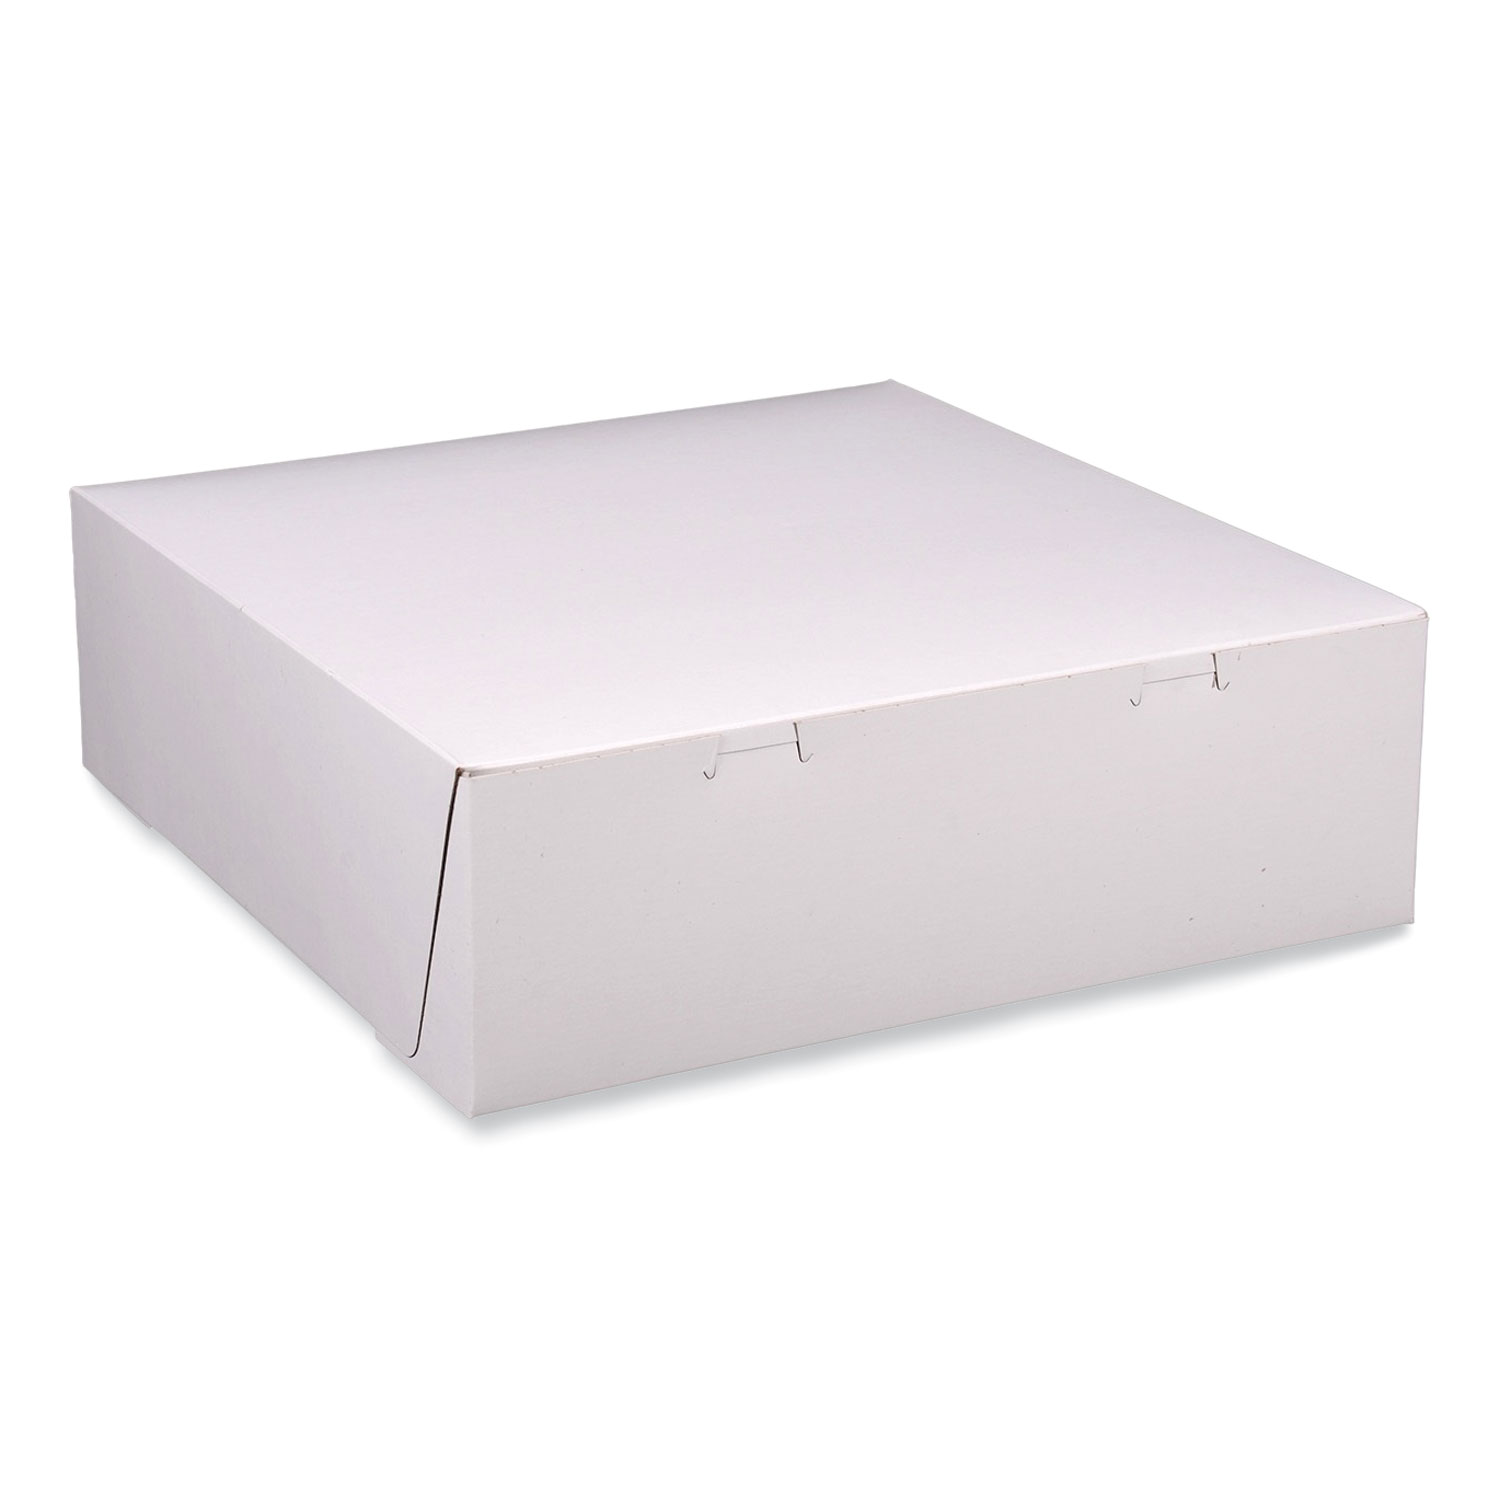 Amazon.com: BAKIPACK 25 White Bakery Boxes with Window, 6x6x4 Inches Cake  Boxes with Window, Treat Boxes for Small Bakery, Dessert, Candy, Cookies,  Pastry, Party Favors, Wedding Cake: Industrial & Scientific